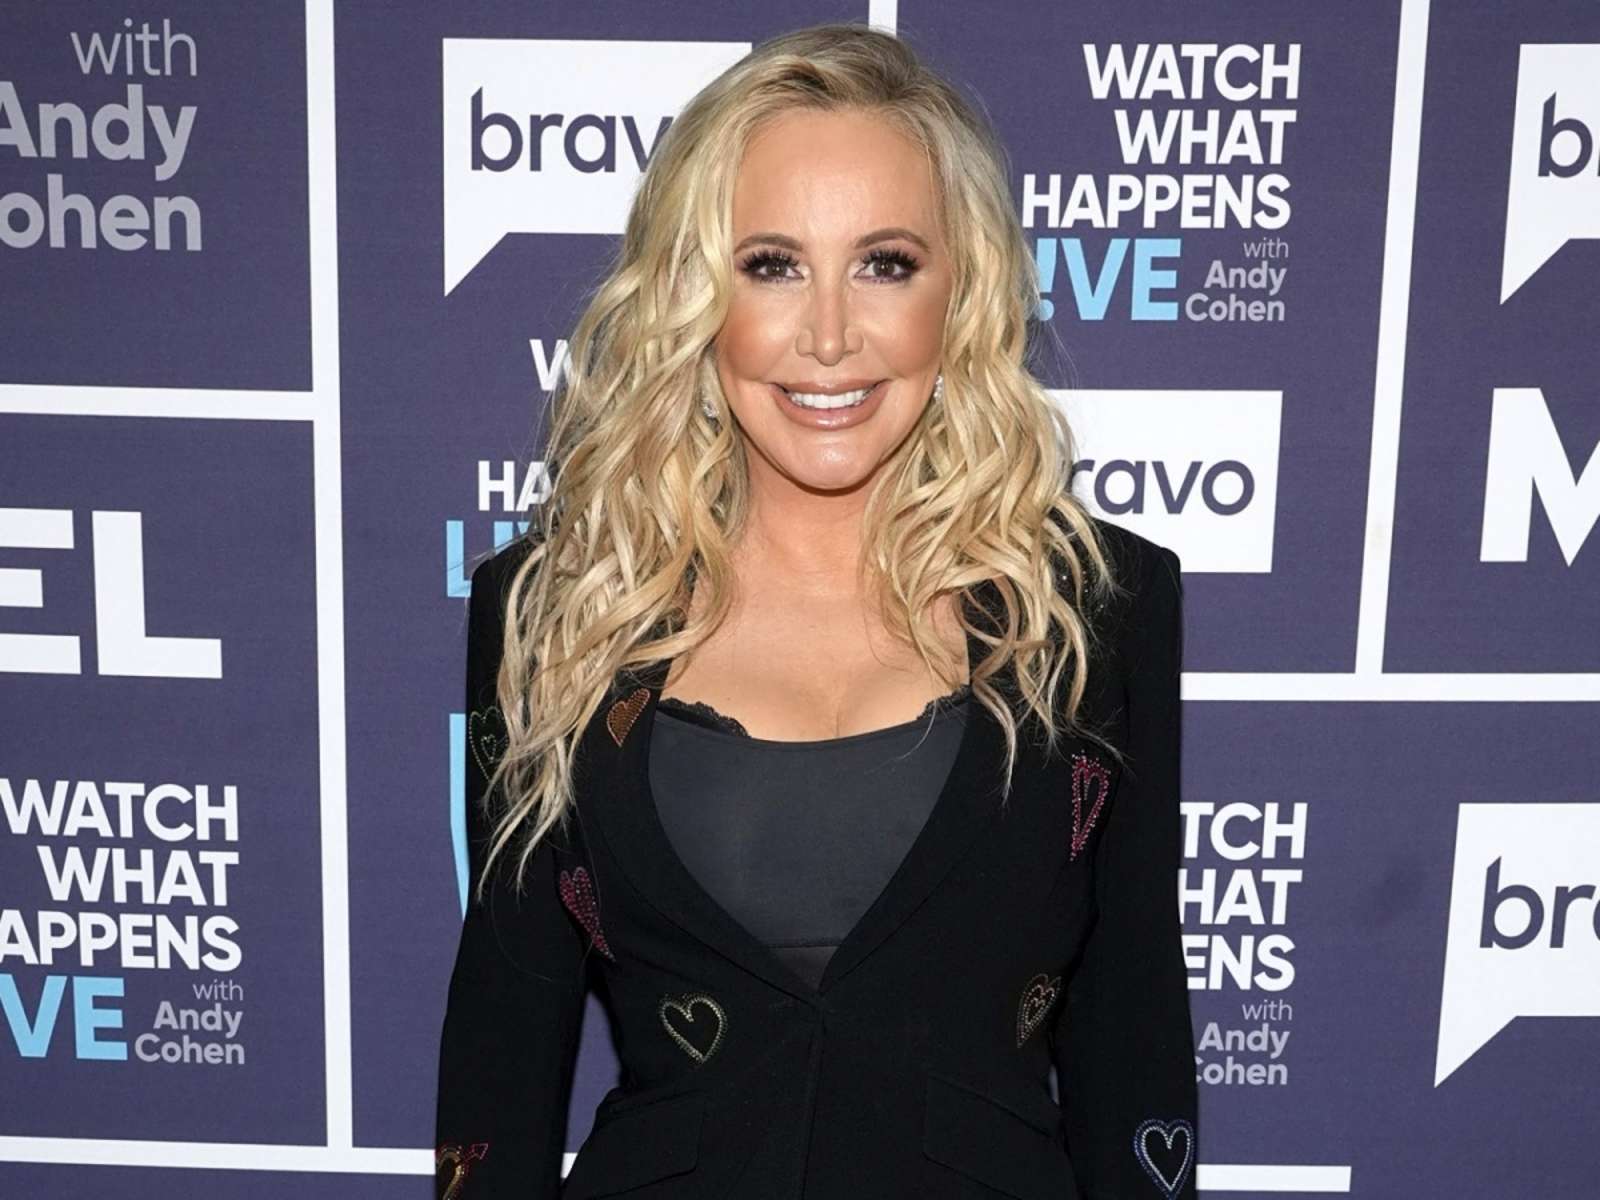 'The Real Housewives of Orange County' star Shannon Beador wishes Vicki ...